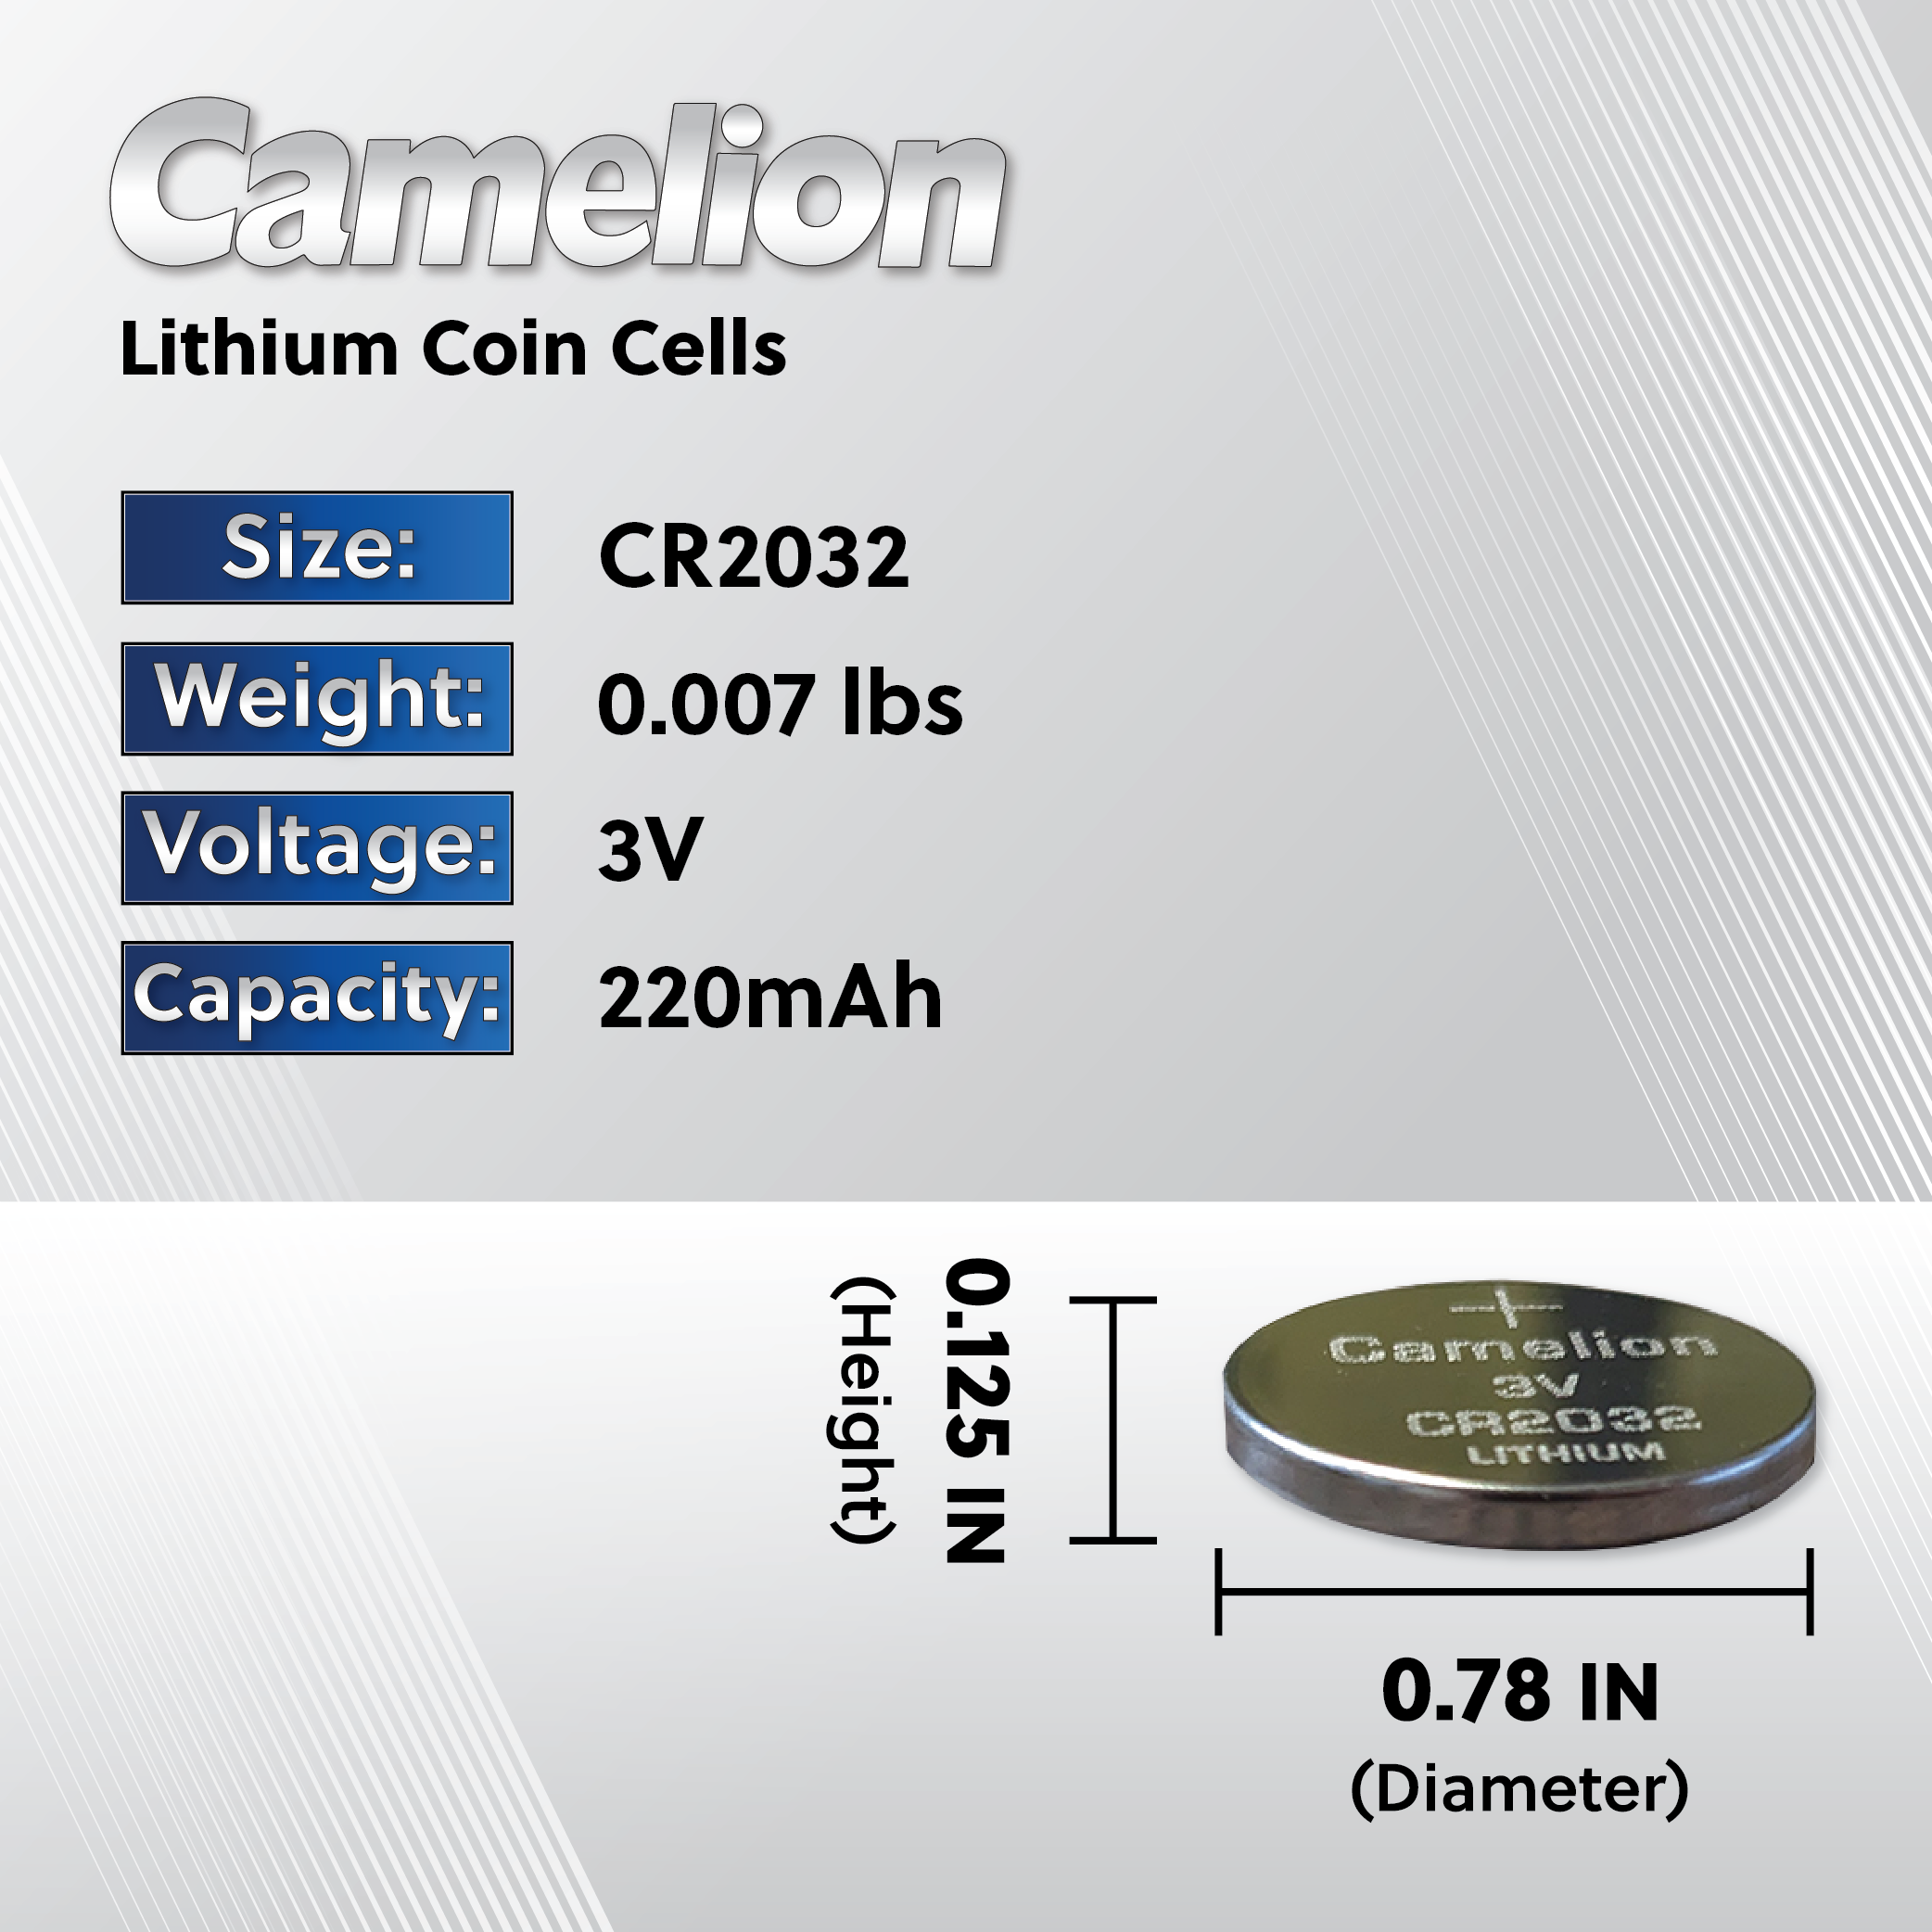 CR2032 Lithium Coin Cell Battery